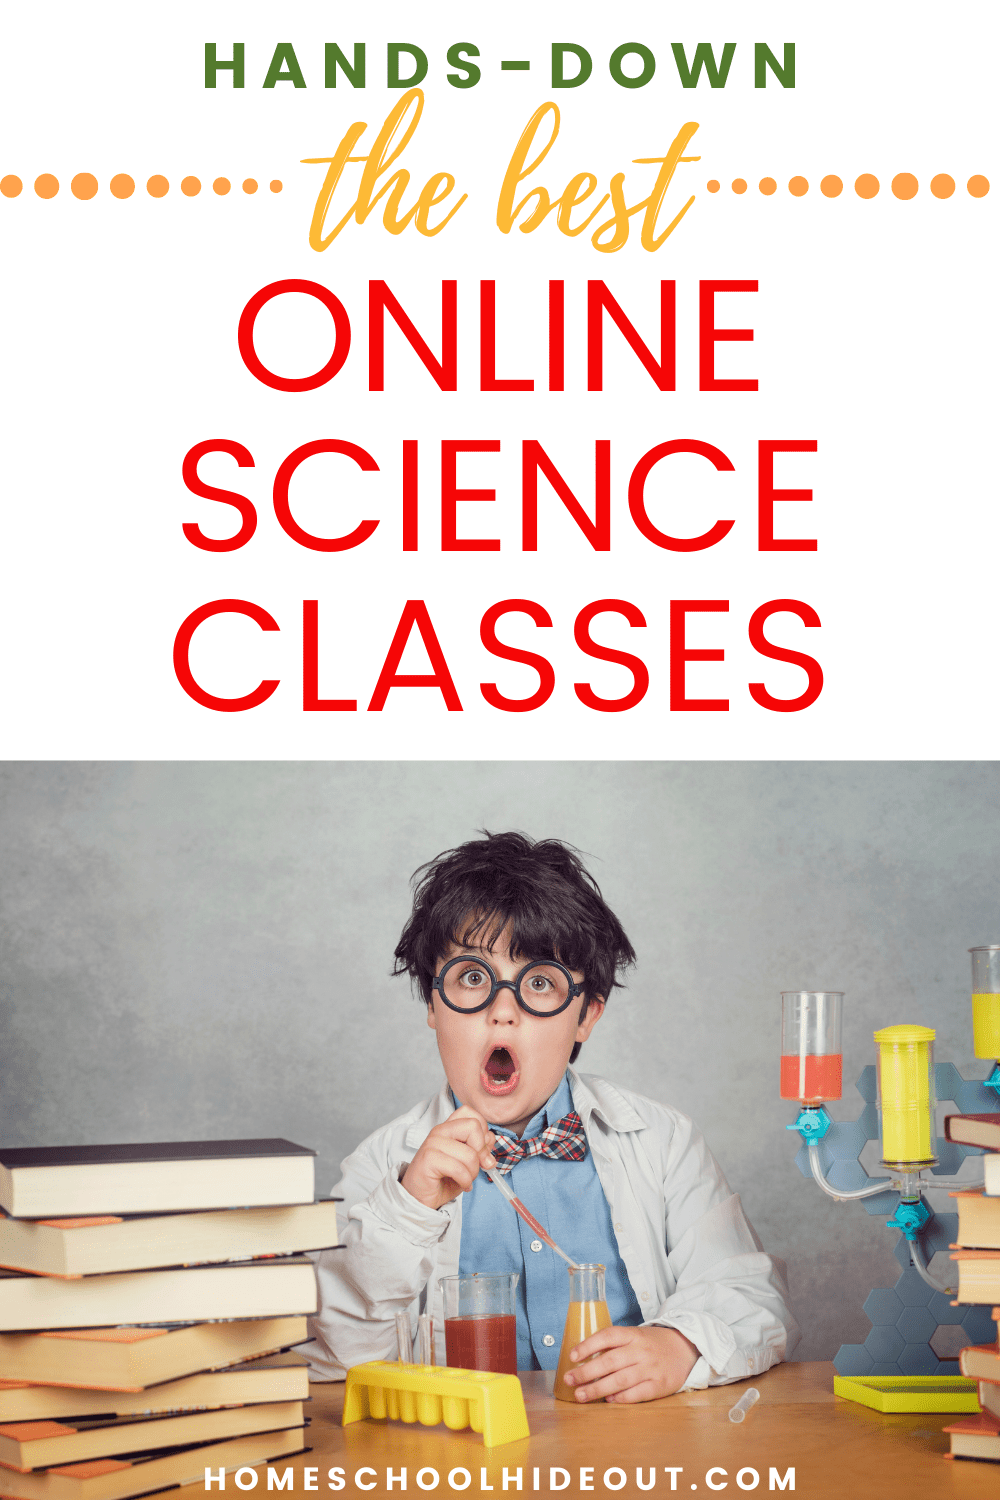 These online science classes by Greg Landry have taken the chaos out of homeschooling! Can't recommend them enough!